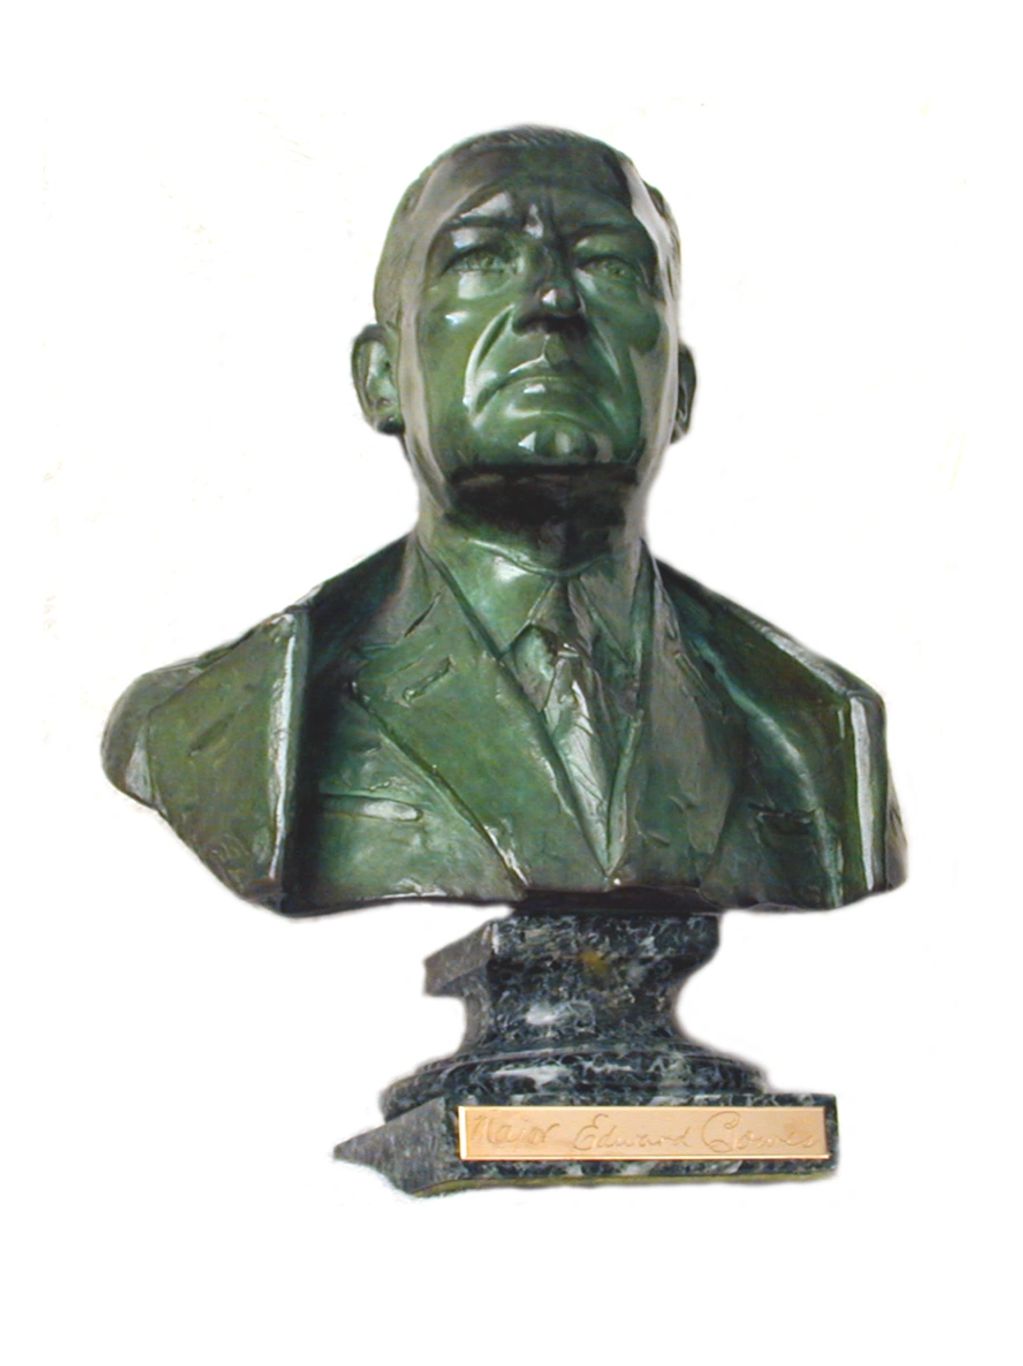 Bronze bust of Major Edward Bowes (signed by Bowes in gold).